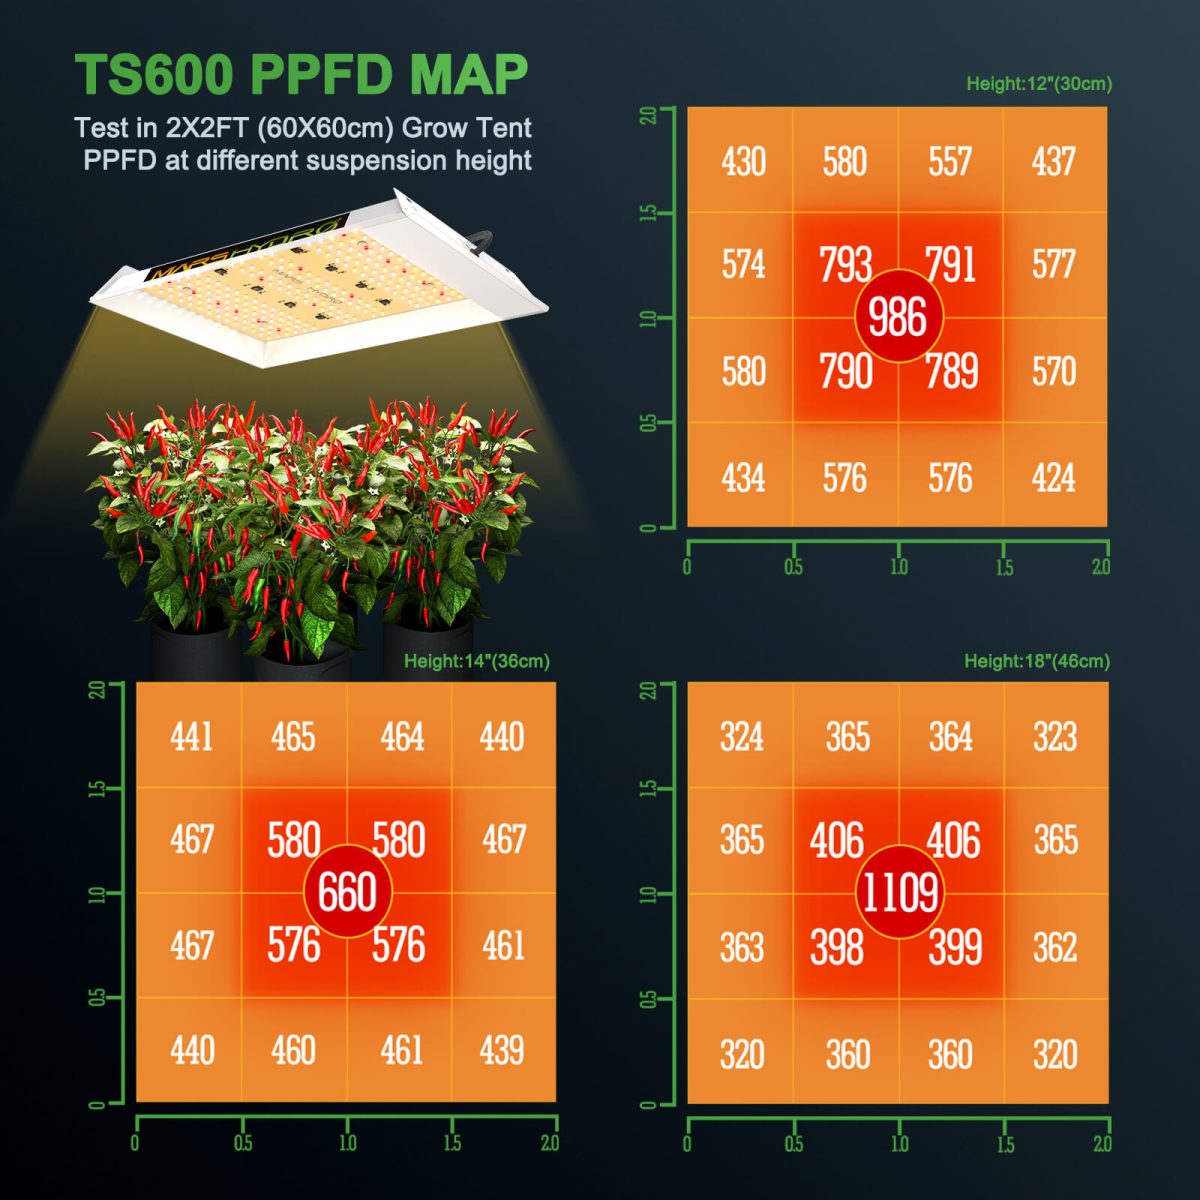 TS 600 PPFD map, tested in 2x2 grow tent at different height 12'', 14''. 18''